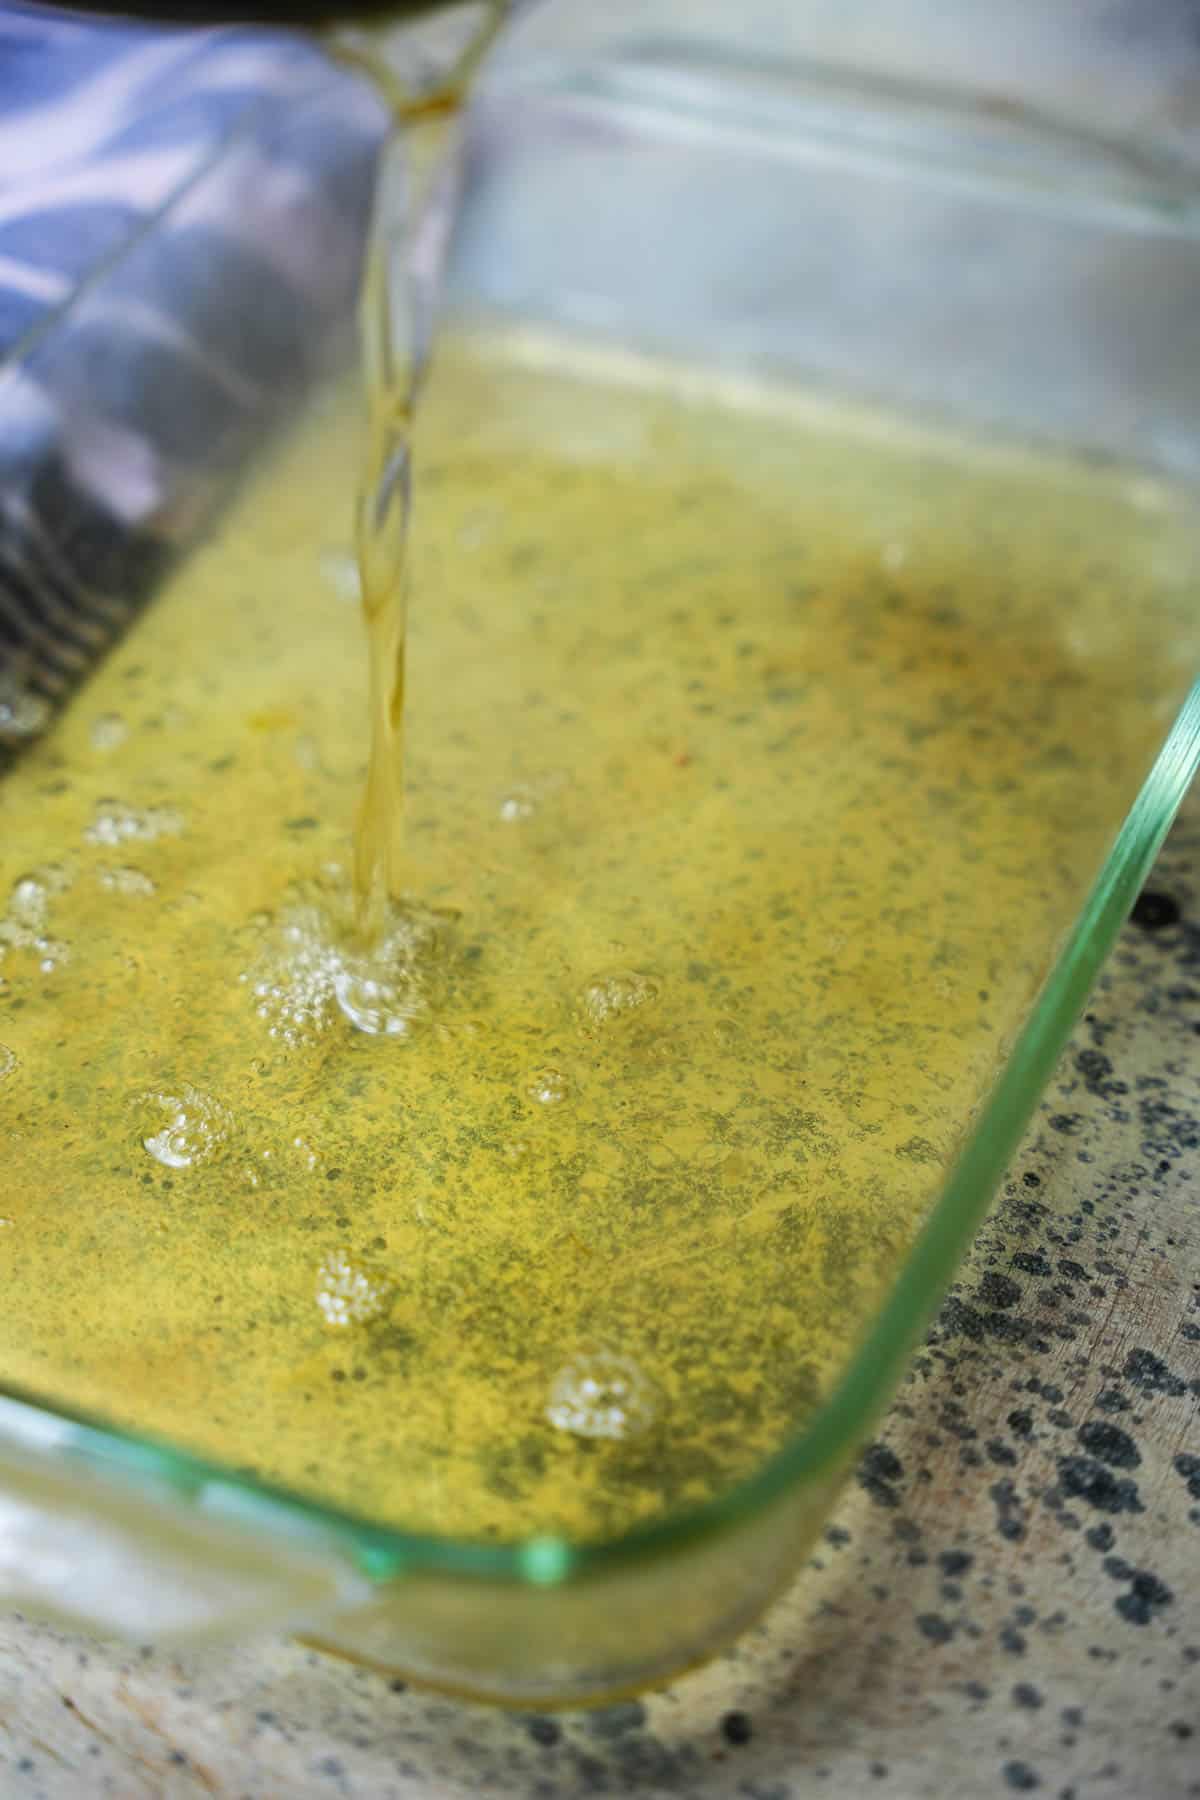 The cooked pandan jelly liquid is poured into a pyrex pan to cool and set up.